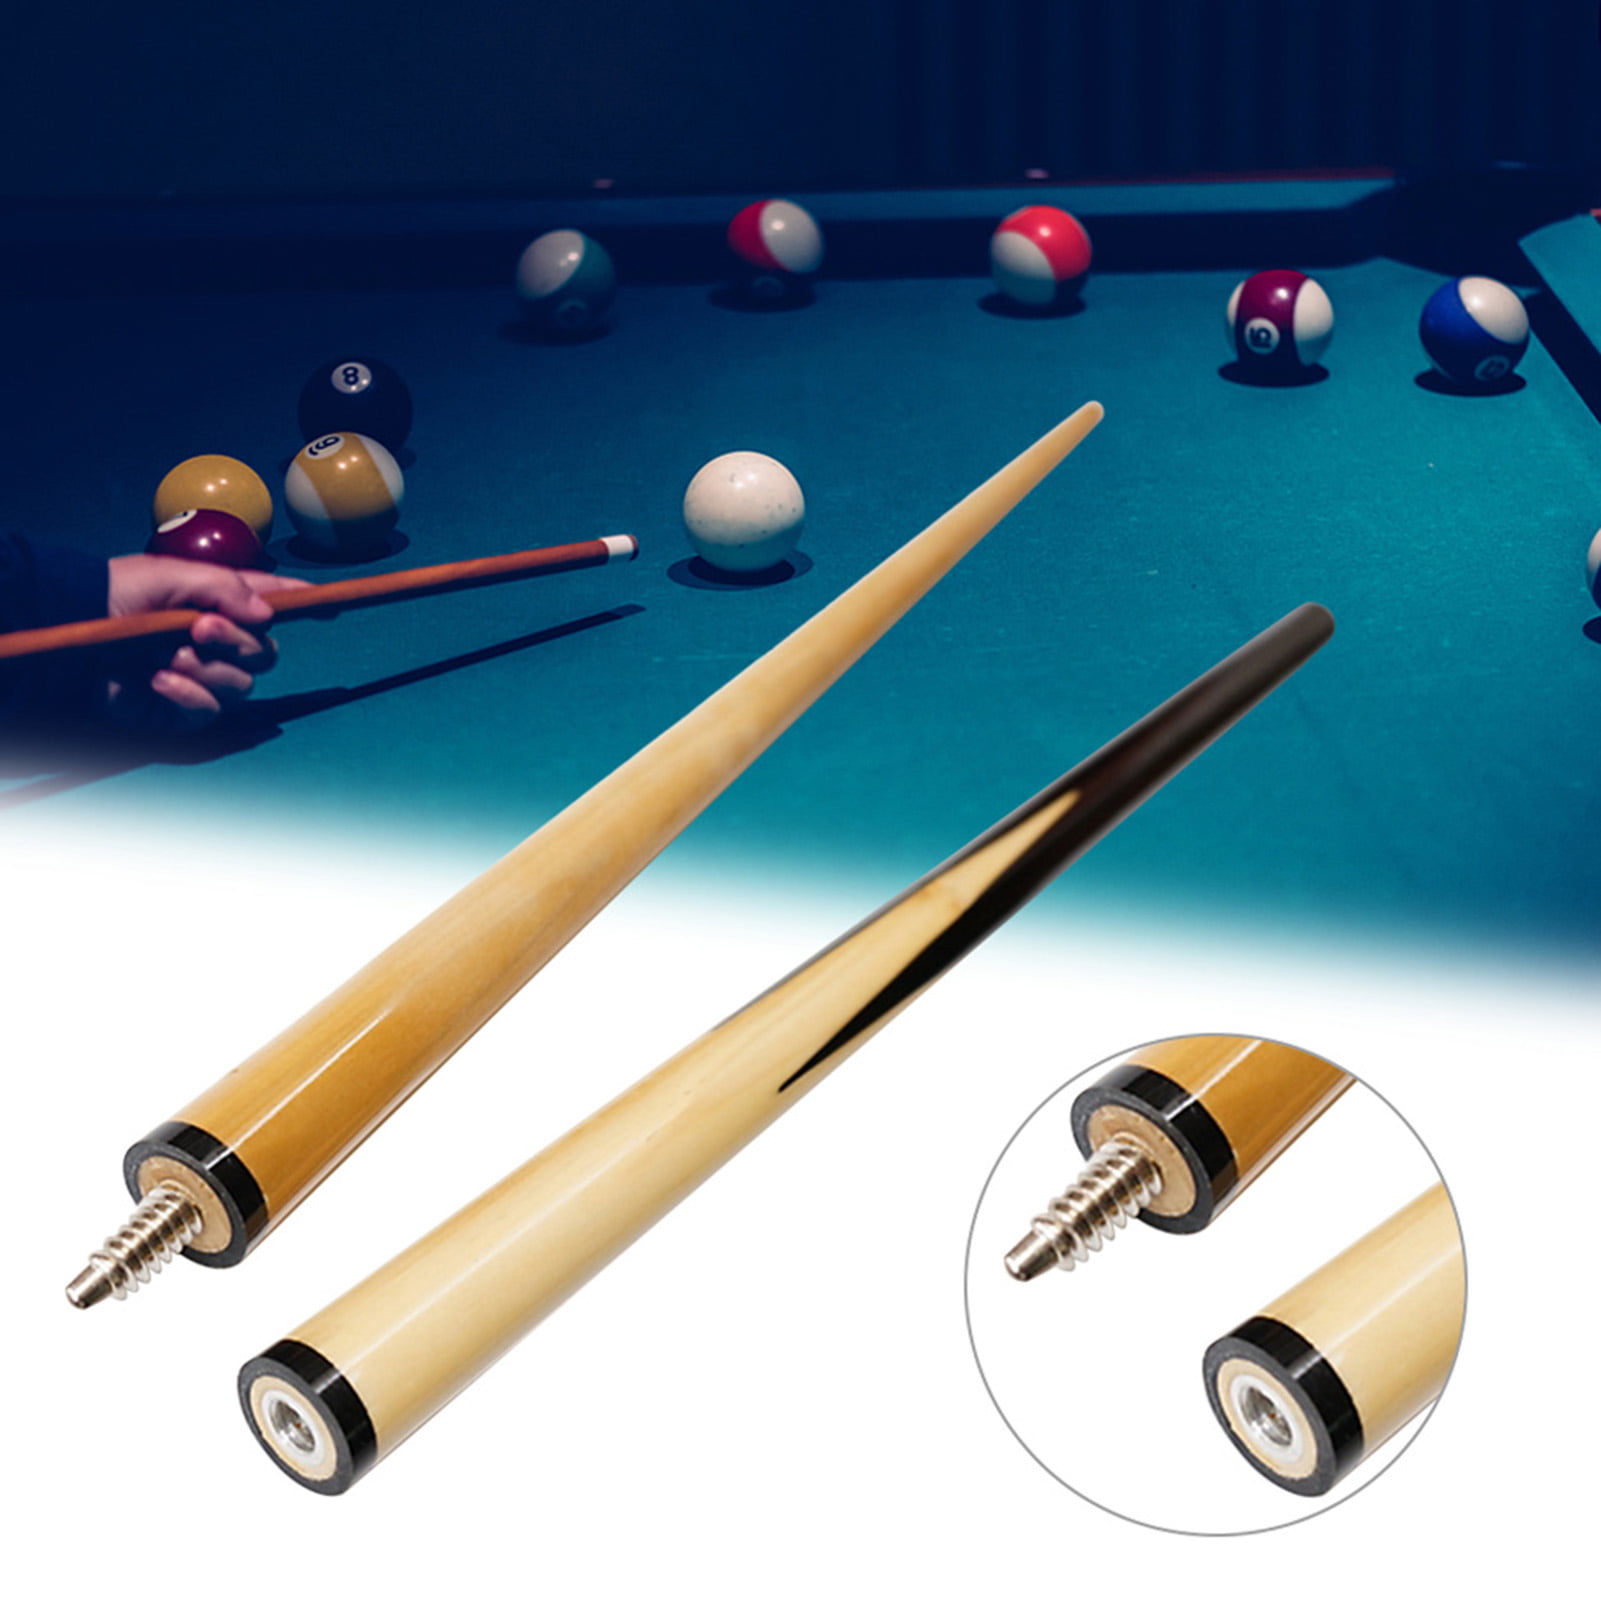 Top Quality Pool Snooker Hard Cue Case for 2 x 1 piece cues Linen finishes asstd 